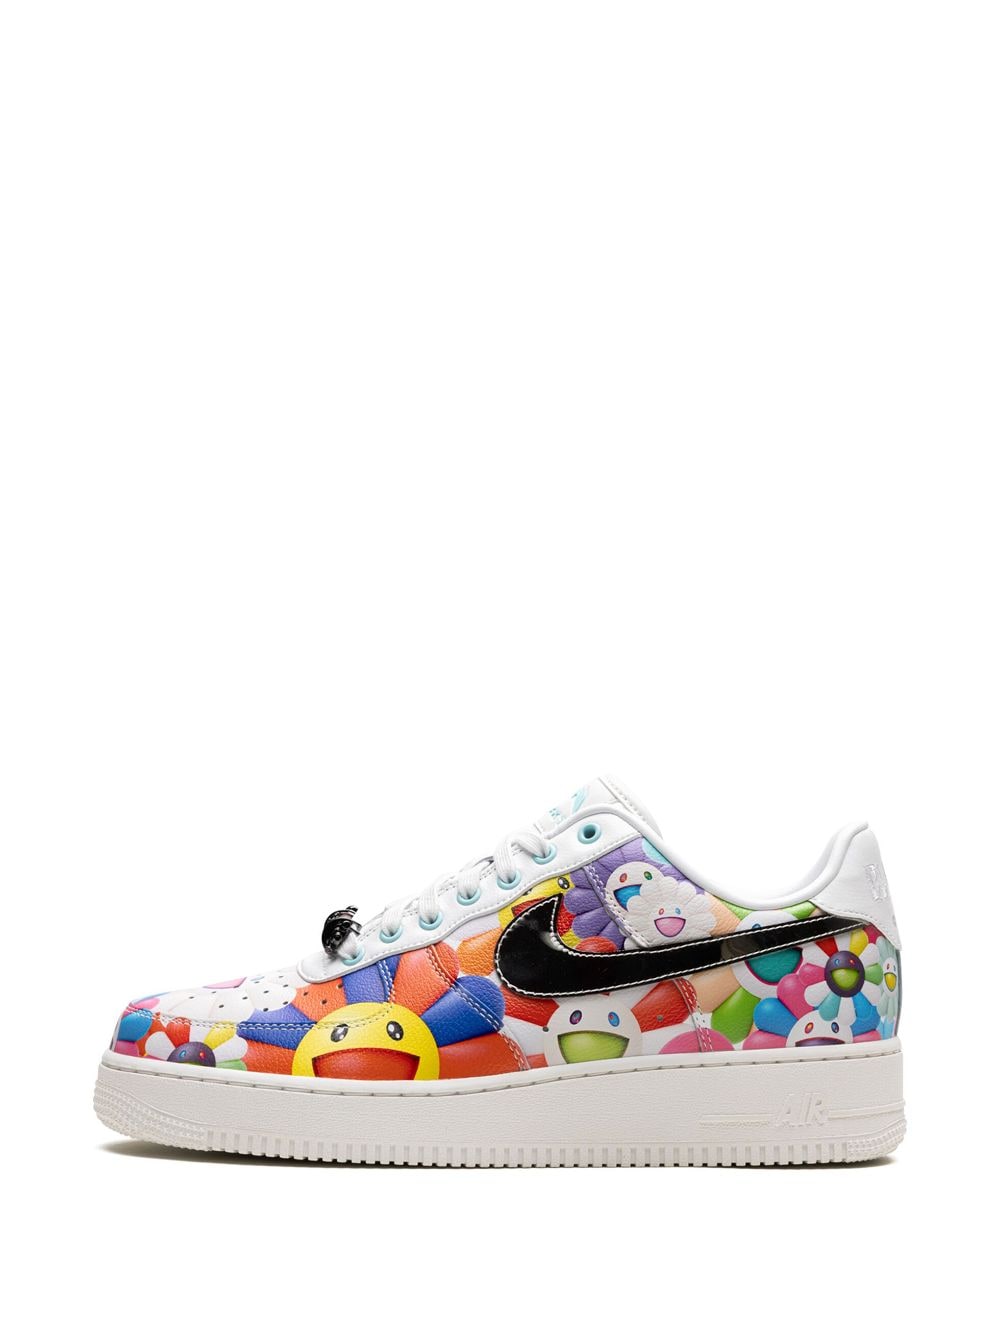 Swoosh Drip with Butterflies - Nike Air Force 1, Google Shopping